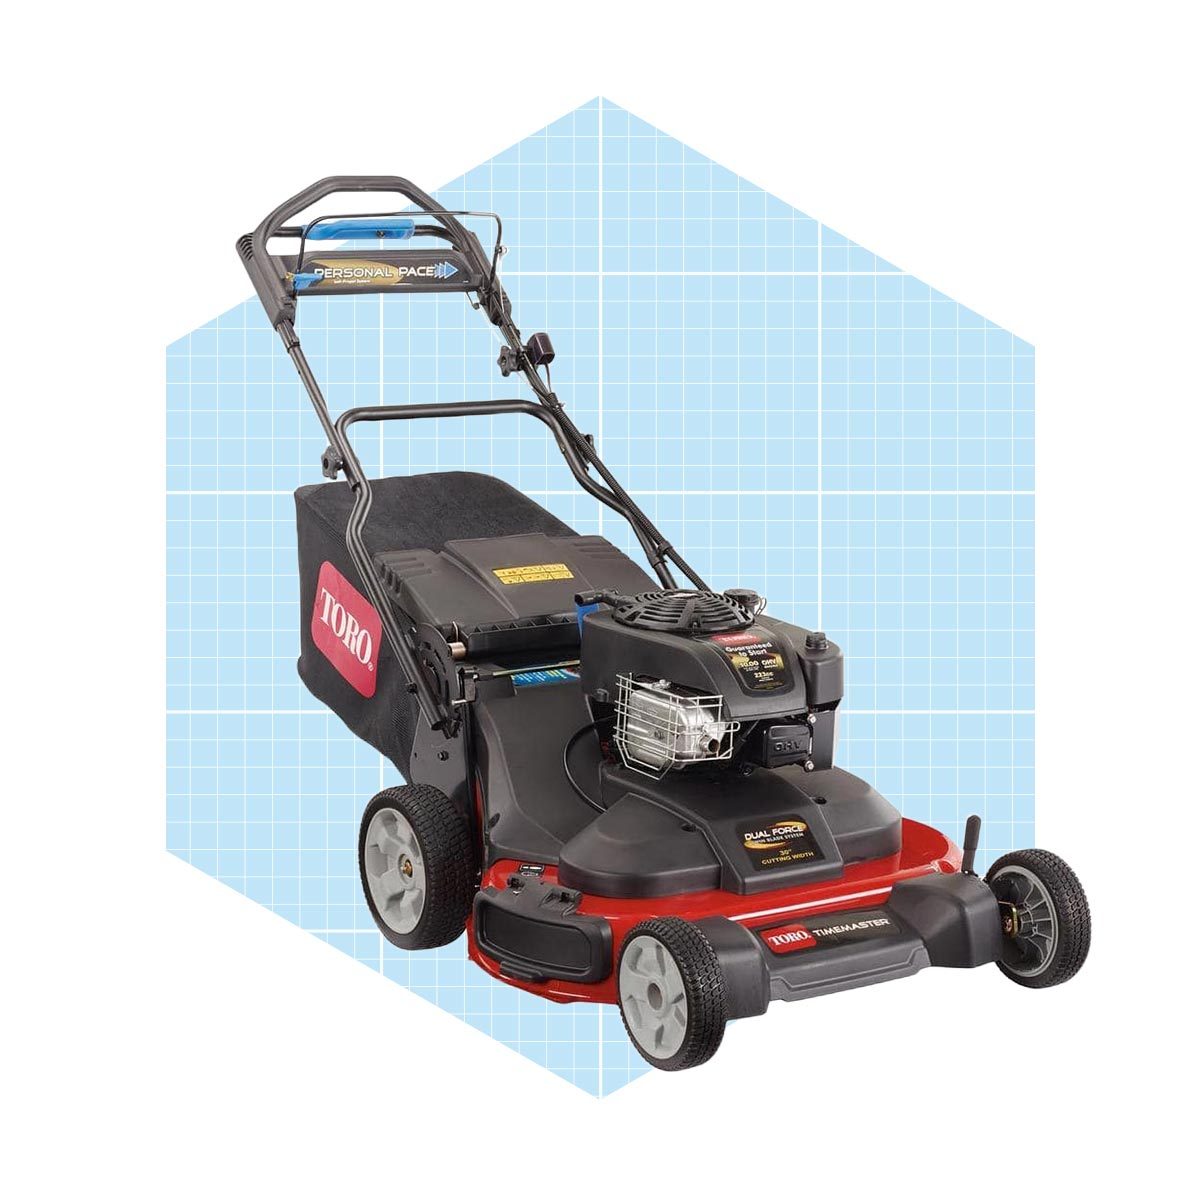 Best Gas Powered Push Mower For A Large Yard